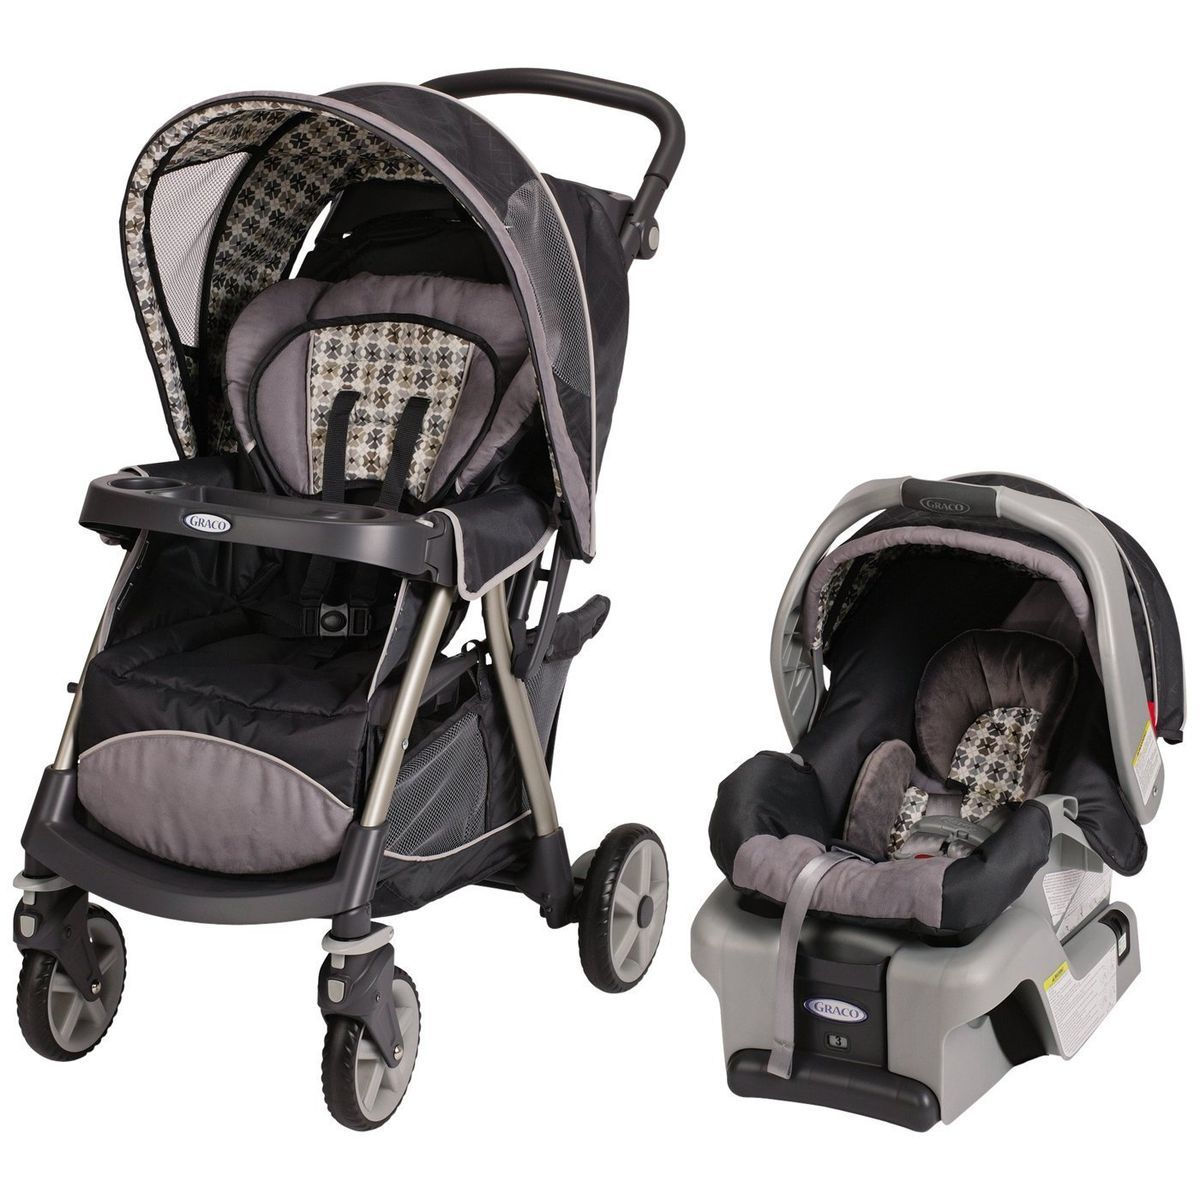 Baby Travel System Unisex Stroller Car Seat With Base Nice Infant Gear 